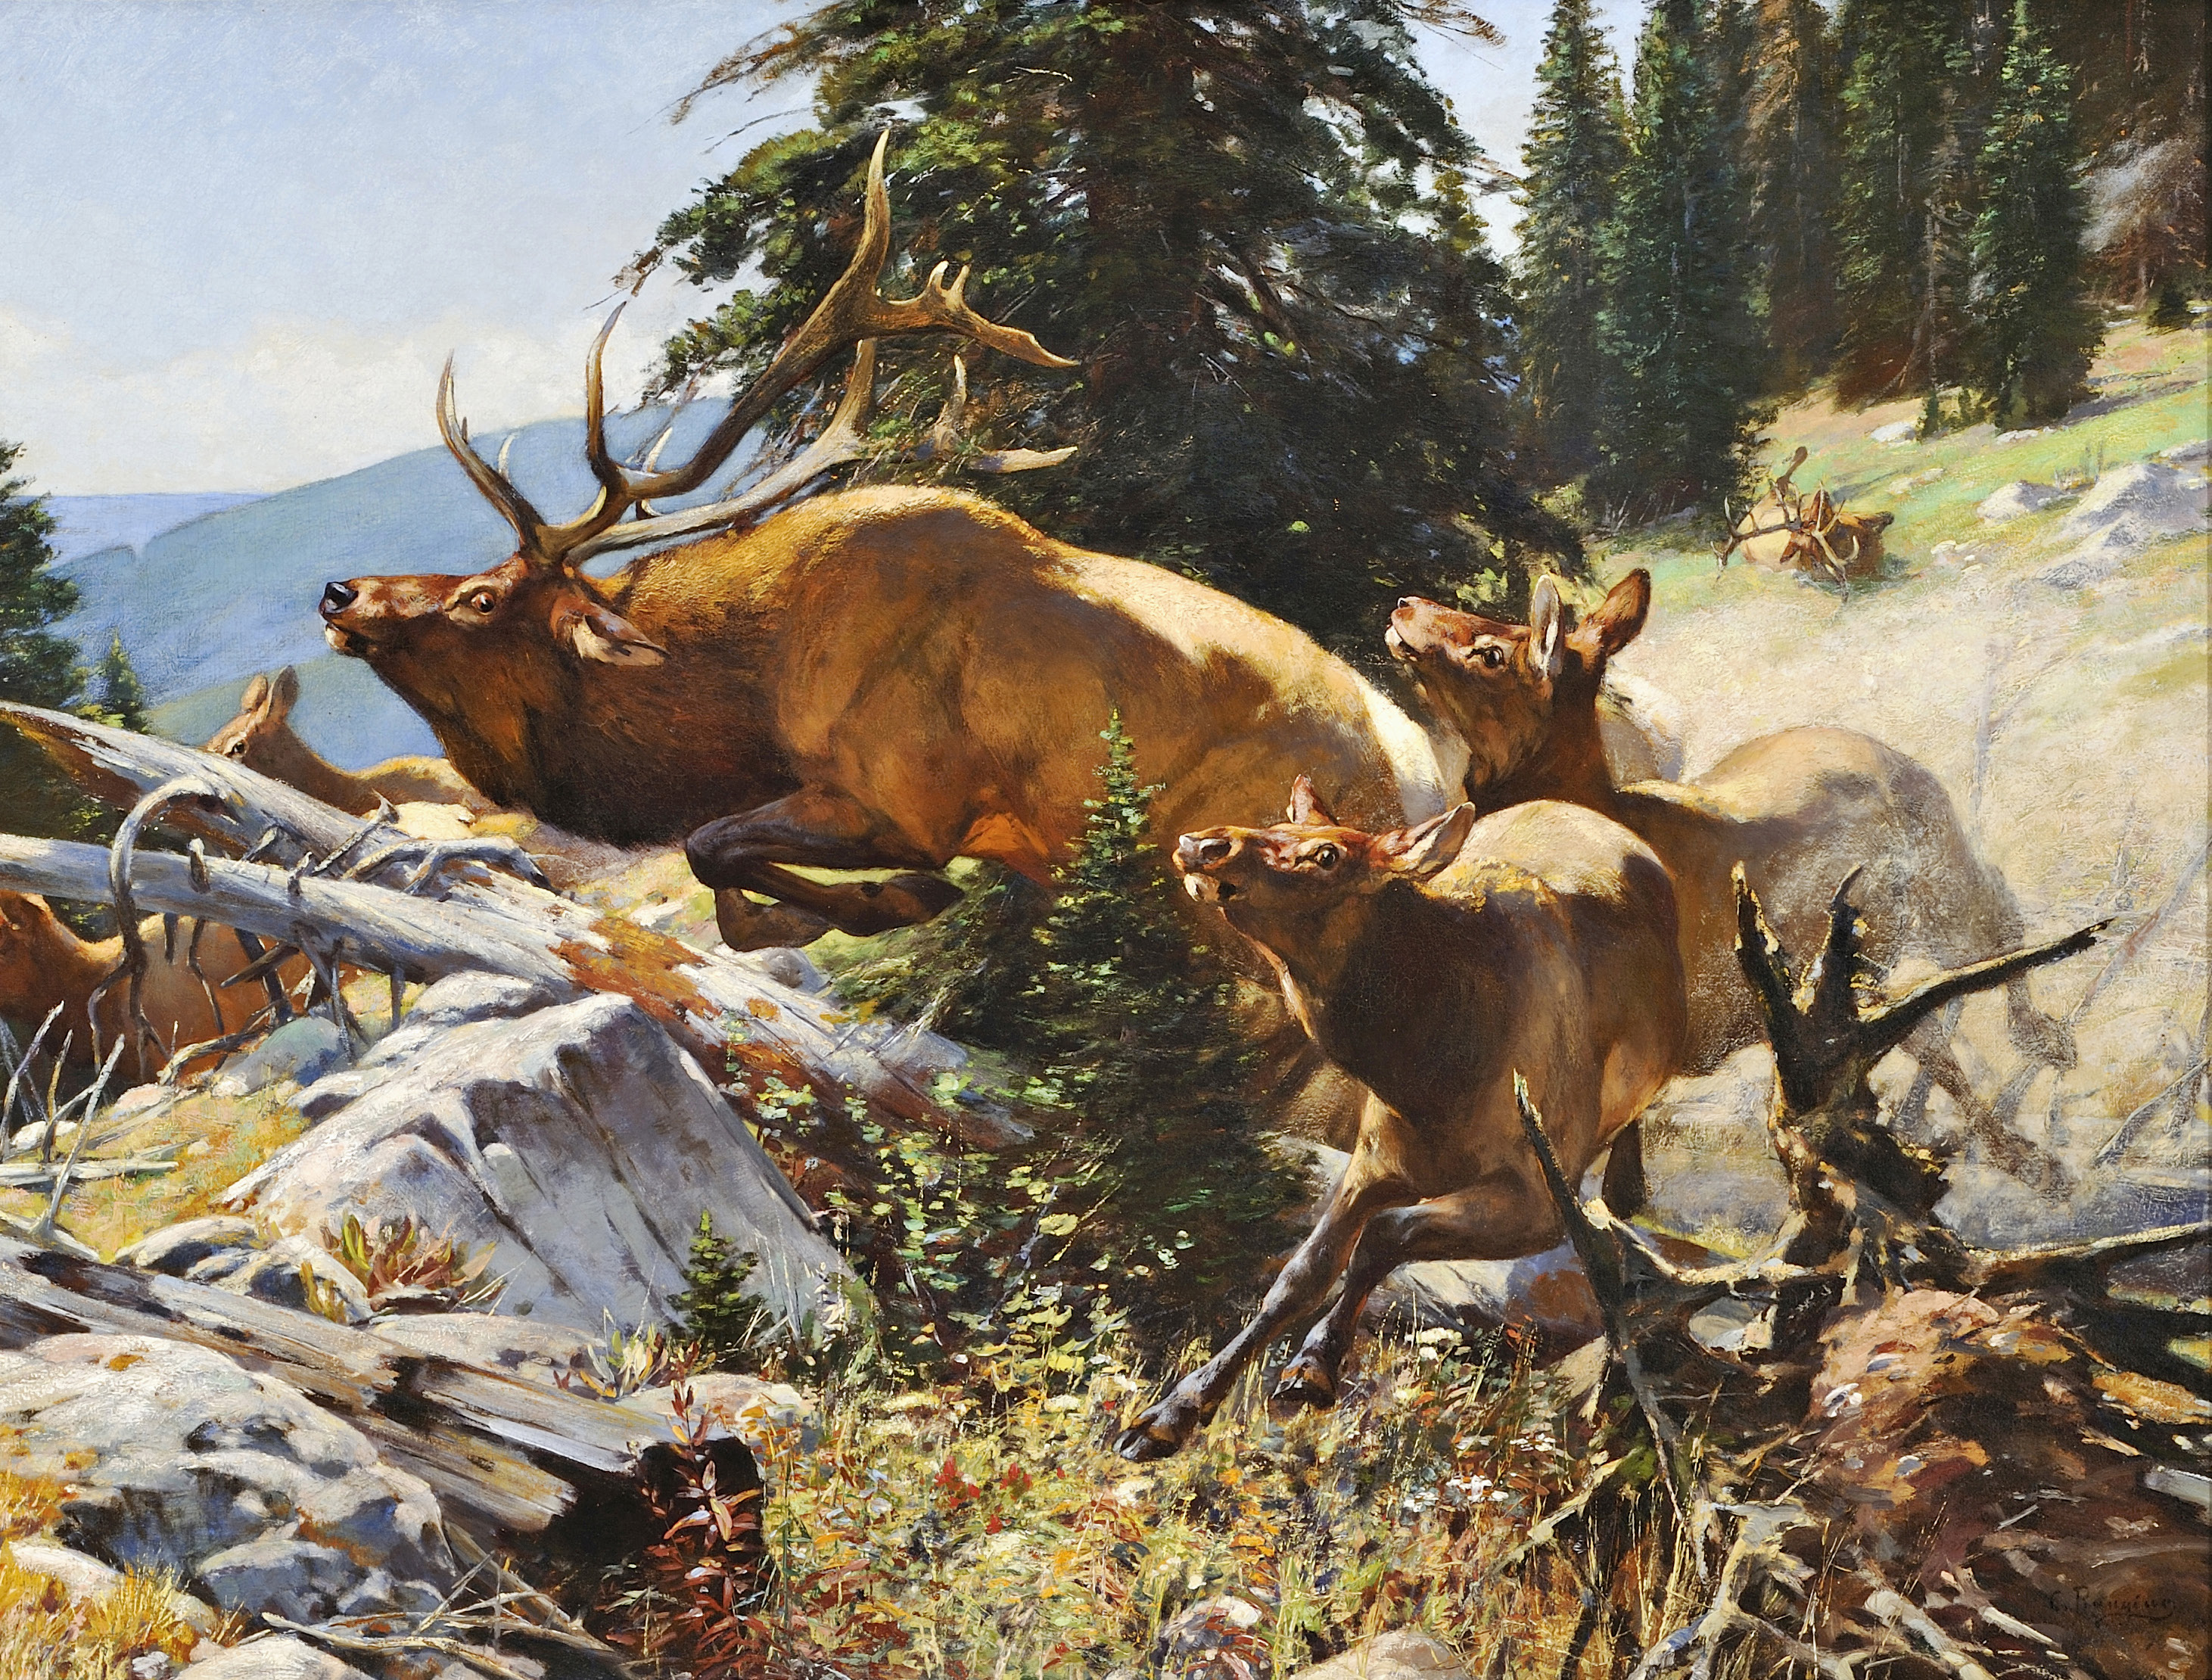 The Stampede, 1899. Carl Rungius. Oil on canvas. 26 x 46 inches. Purchased with funds generously donated by a consortium of anonymous donors, National Museum of Wildlife Art. Estate of Carl Rungius.